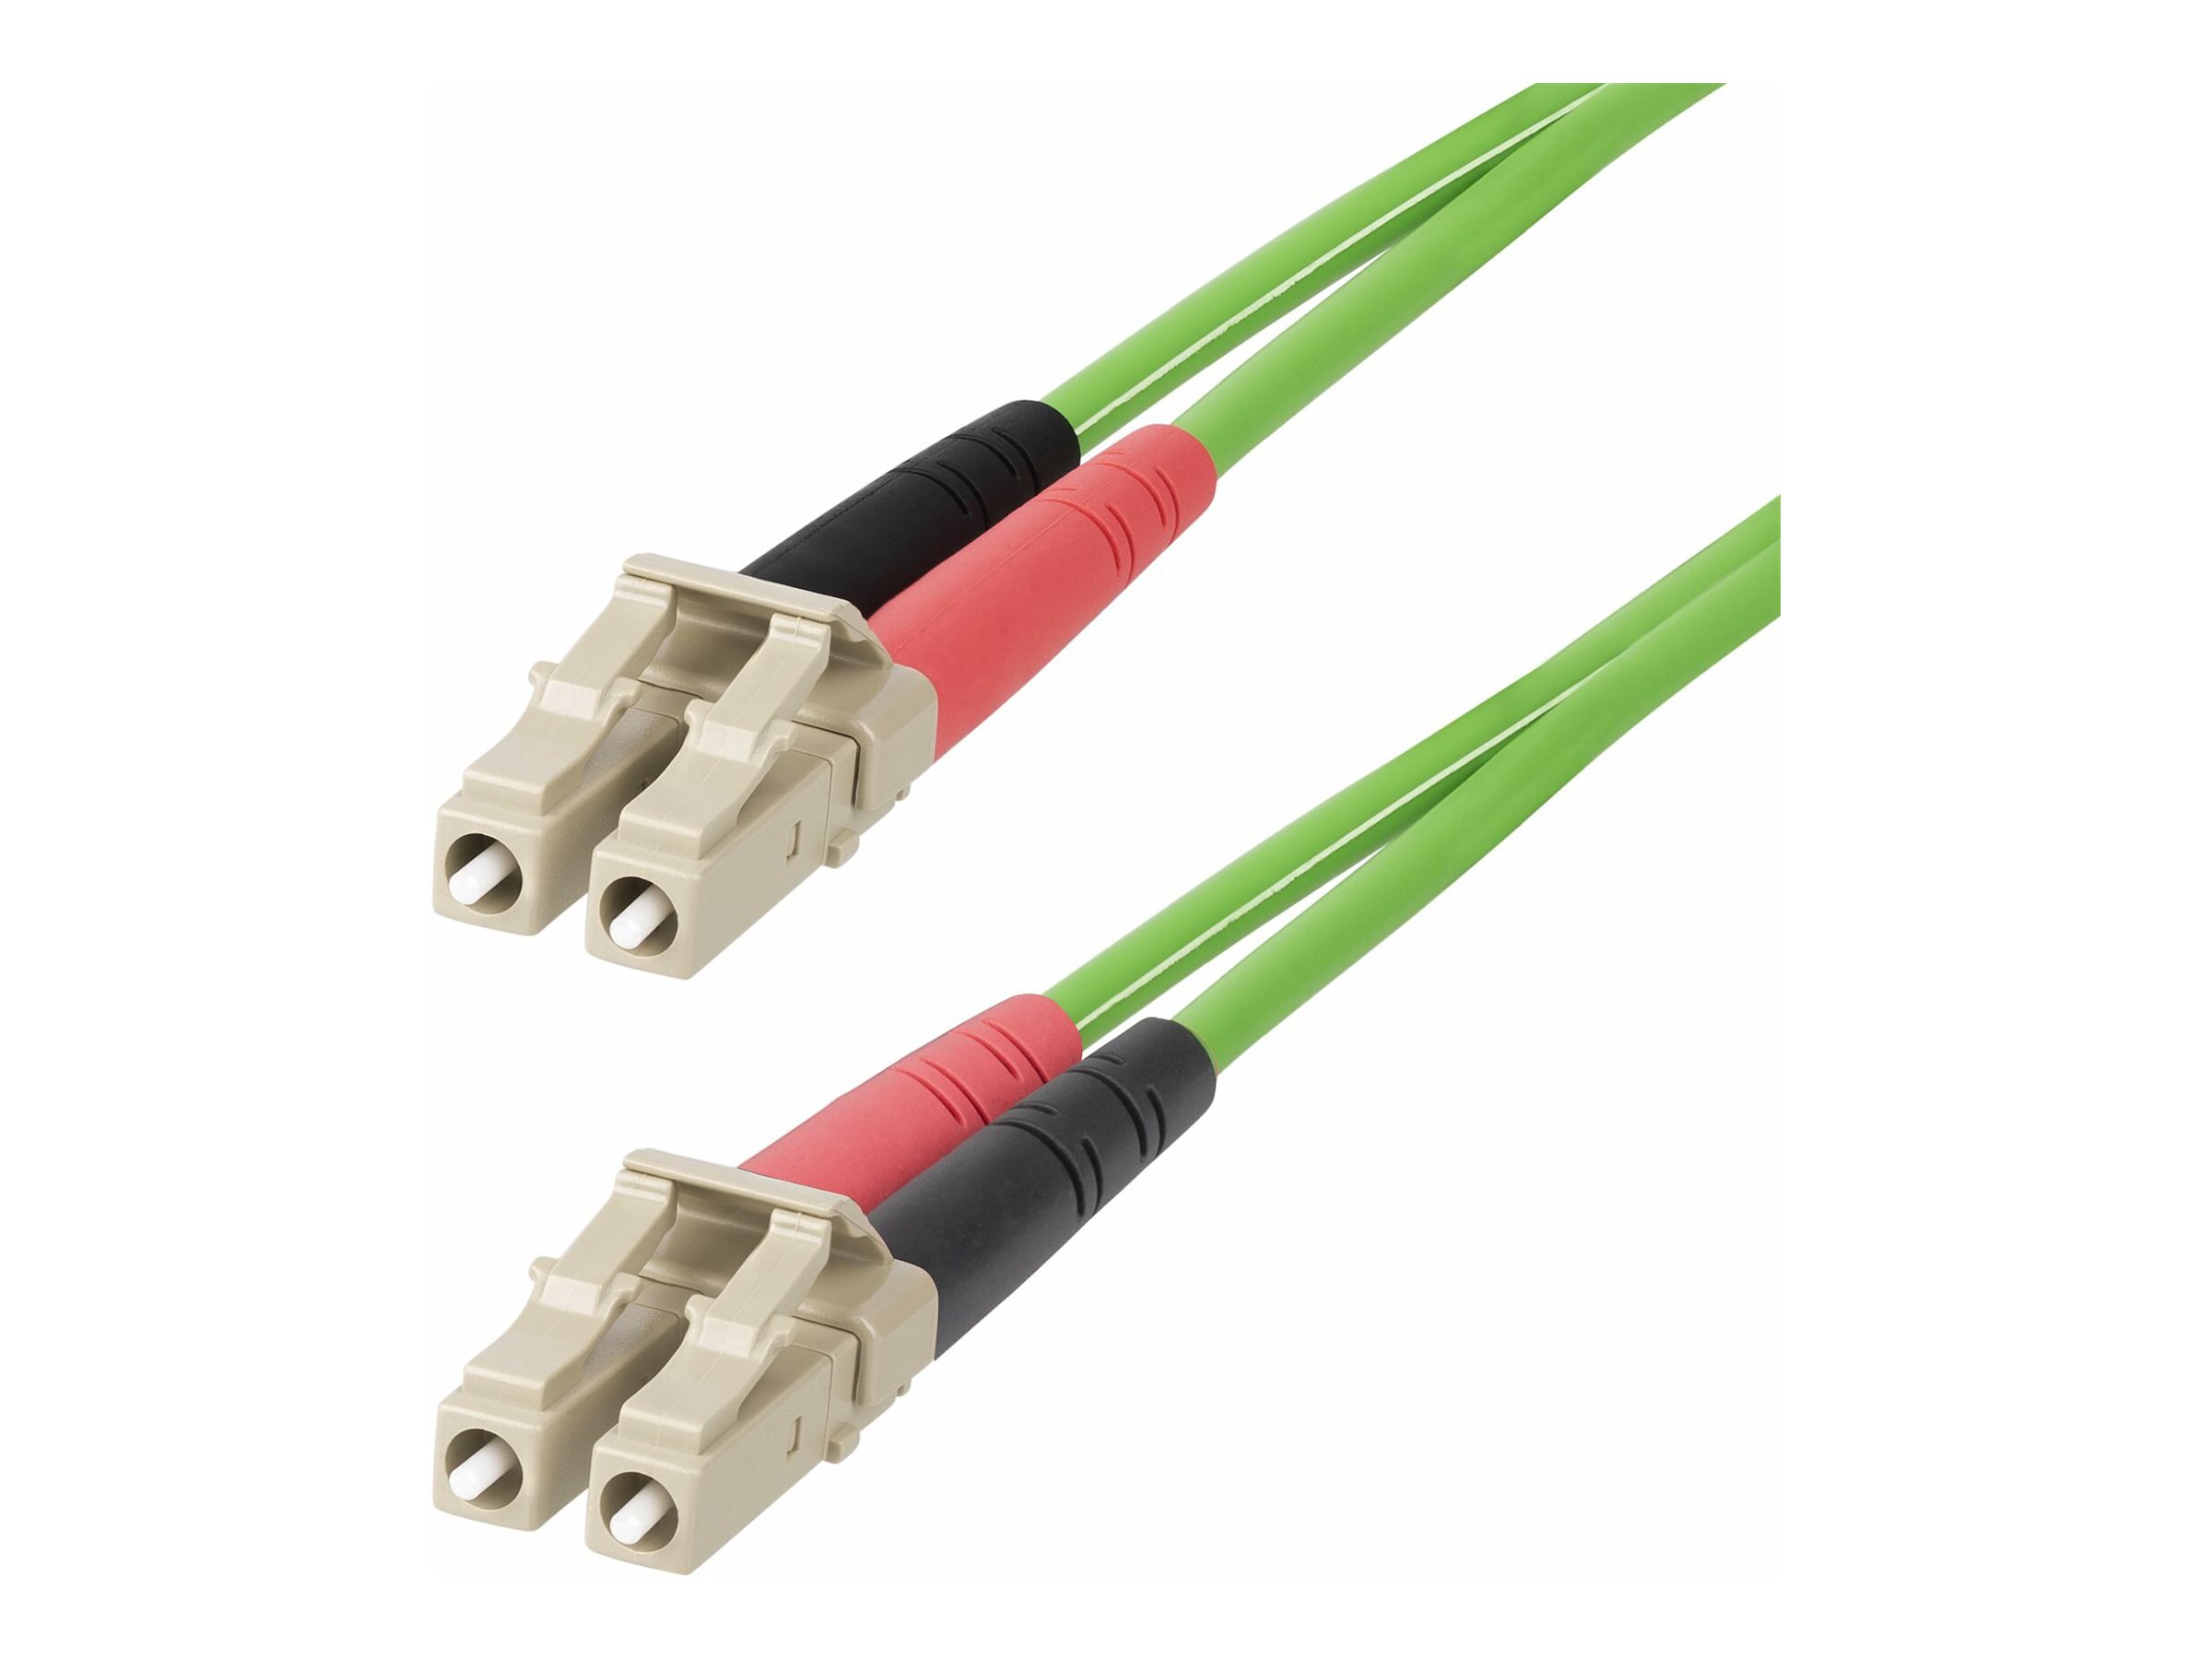 StarTech.com 20m (65ft) LC to LC (UPC) OM5 Multimode Fiber Optic Cable, 50/125m Duplex LOMMF Zipcord, VCSEL, 40G/100G, Bend Ins